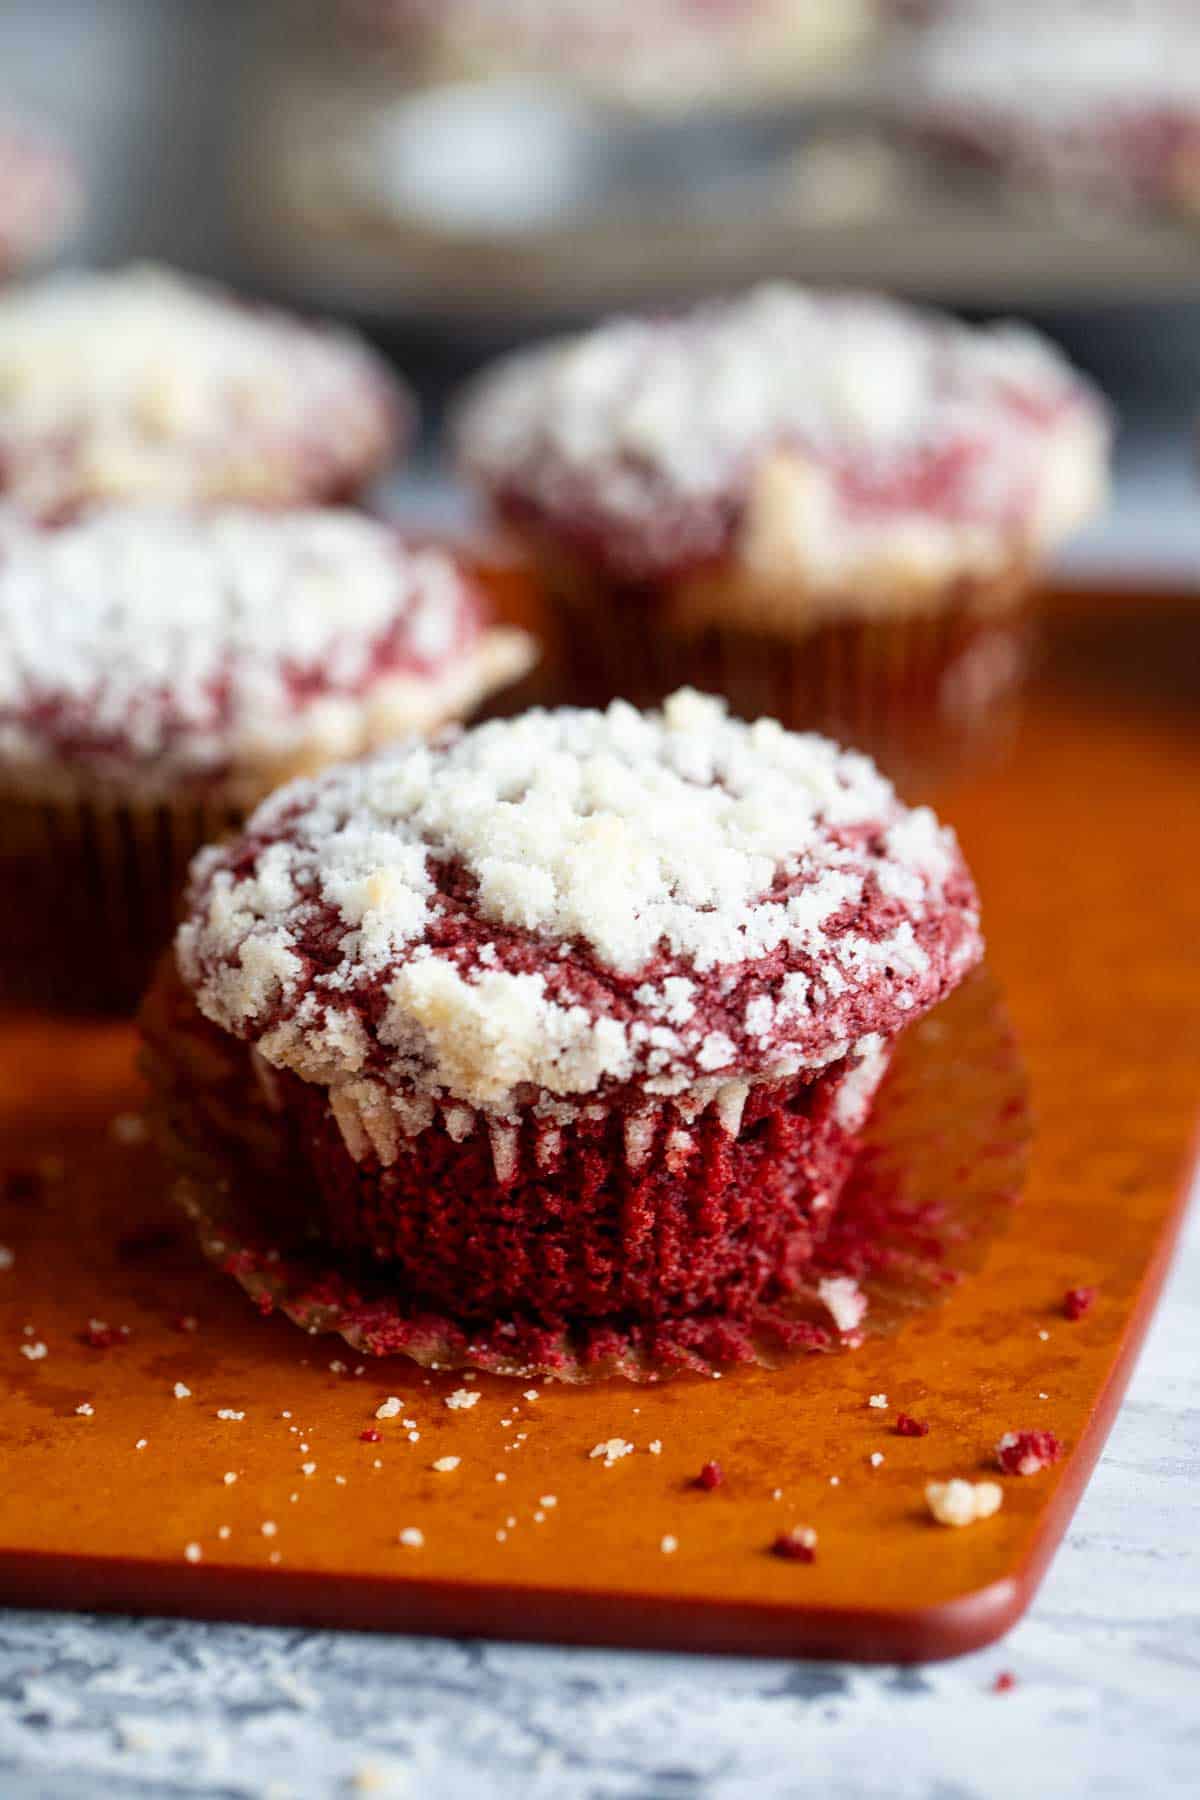 Red velvet muffins on a wooden board with the wrapper peeled away from one muffin.